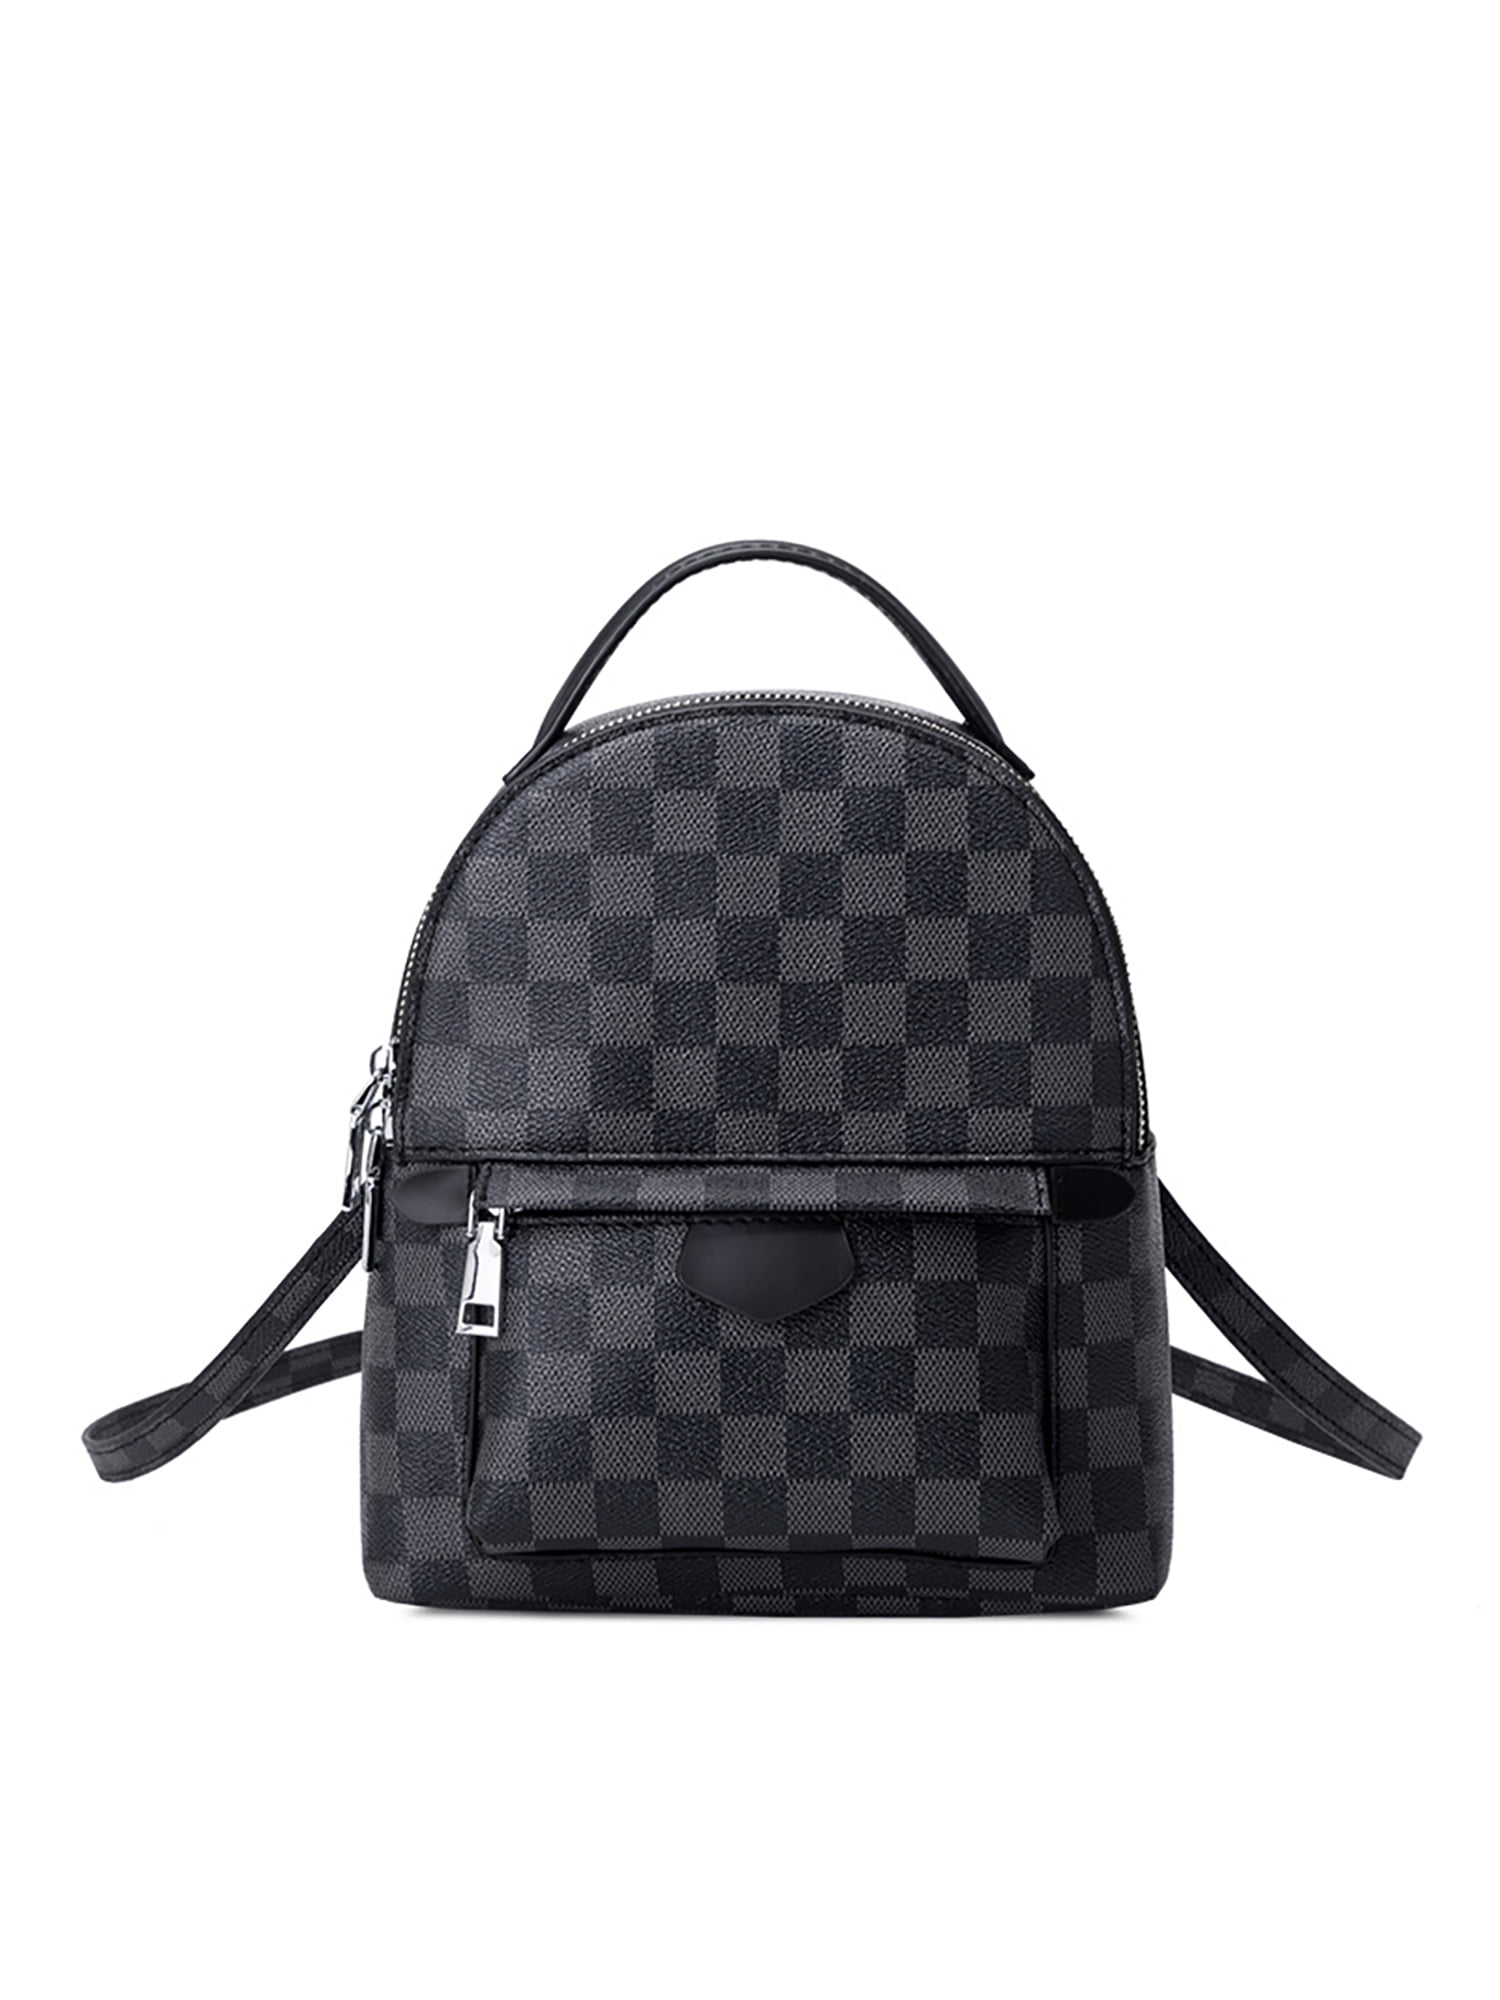 Lumento Women Checkered Backpack Fashion Backpack Leather Satchel